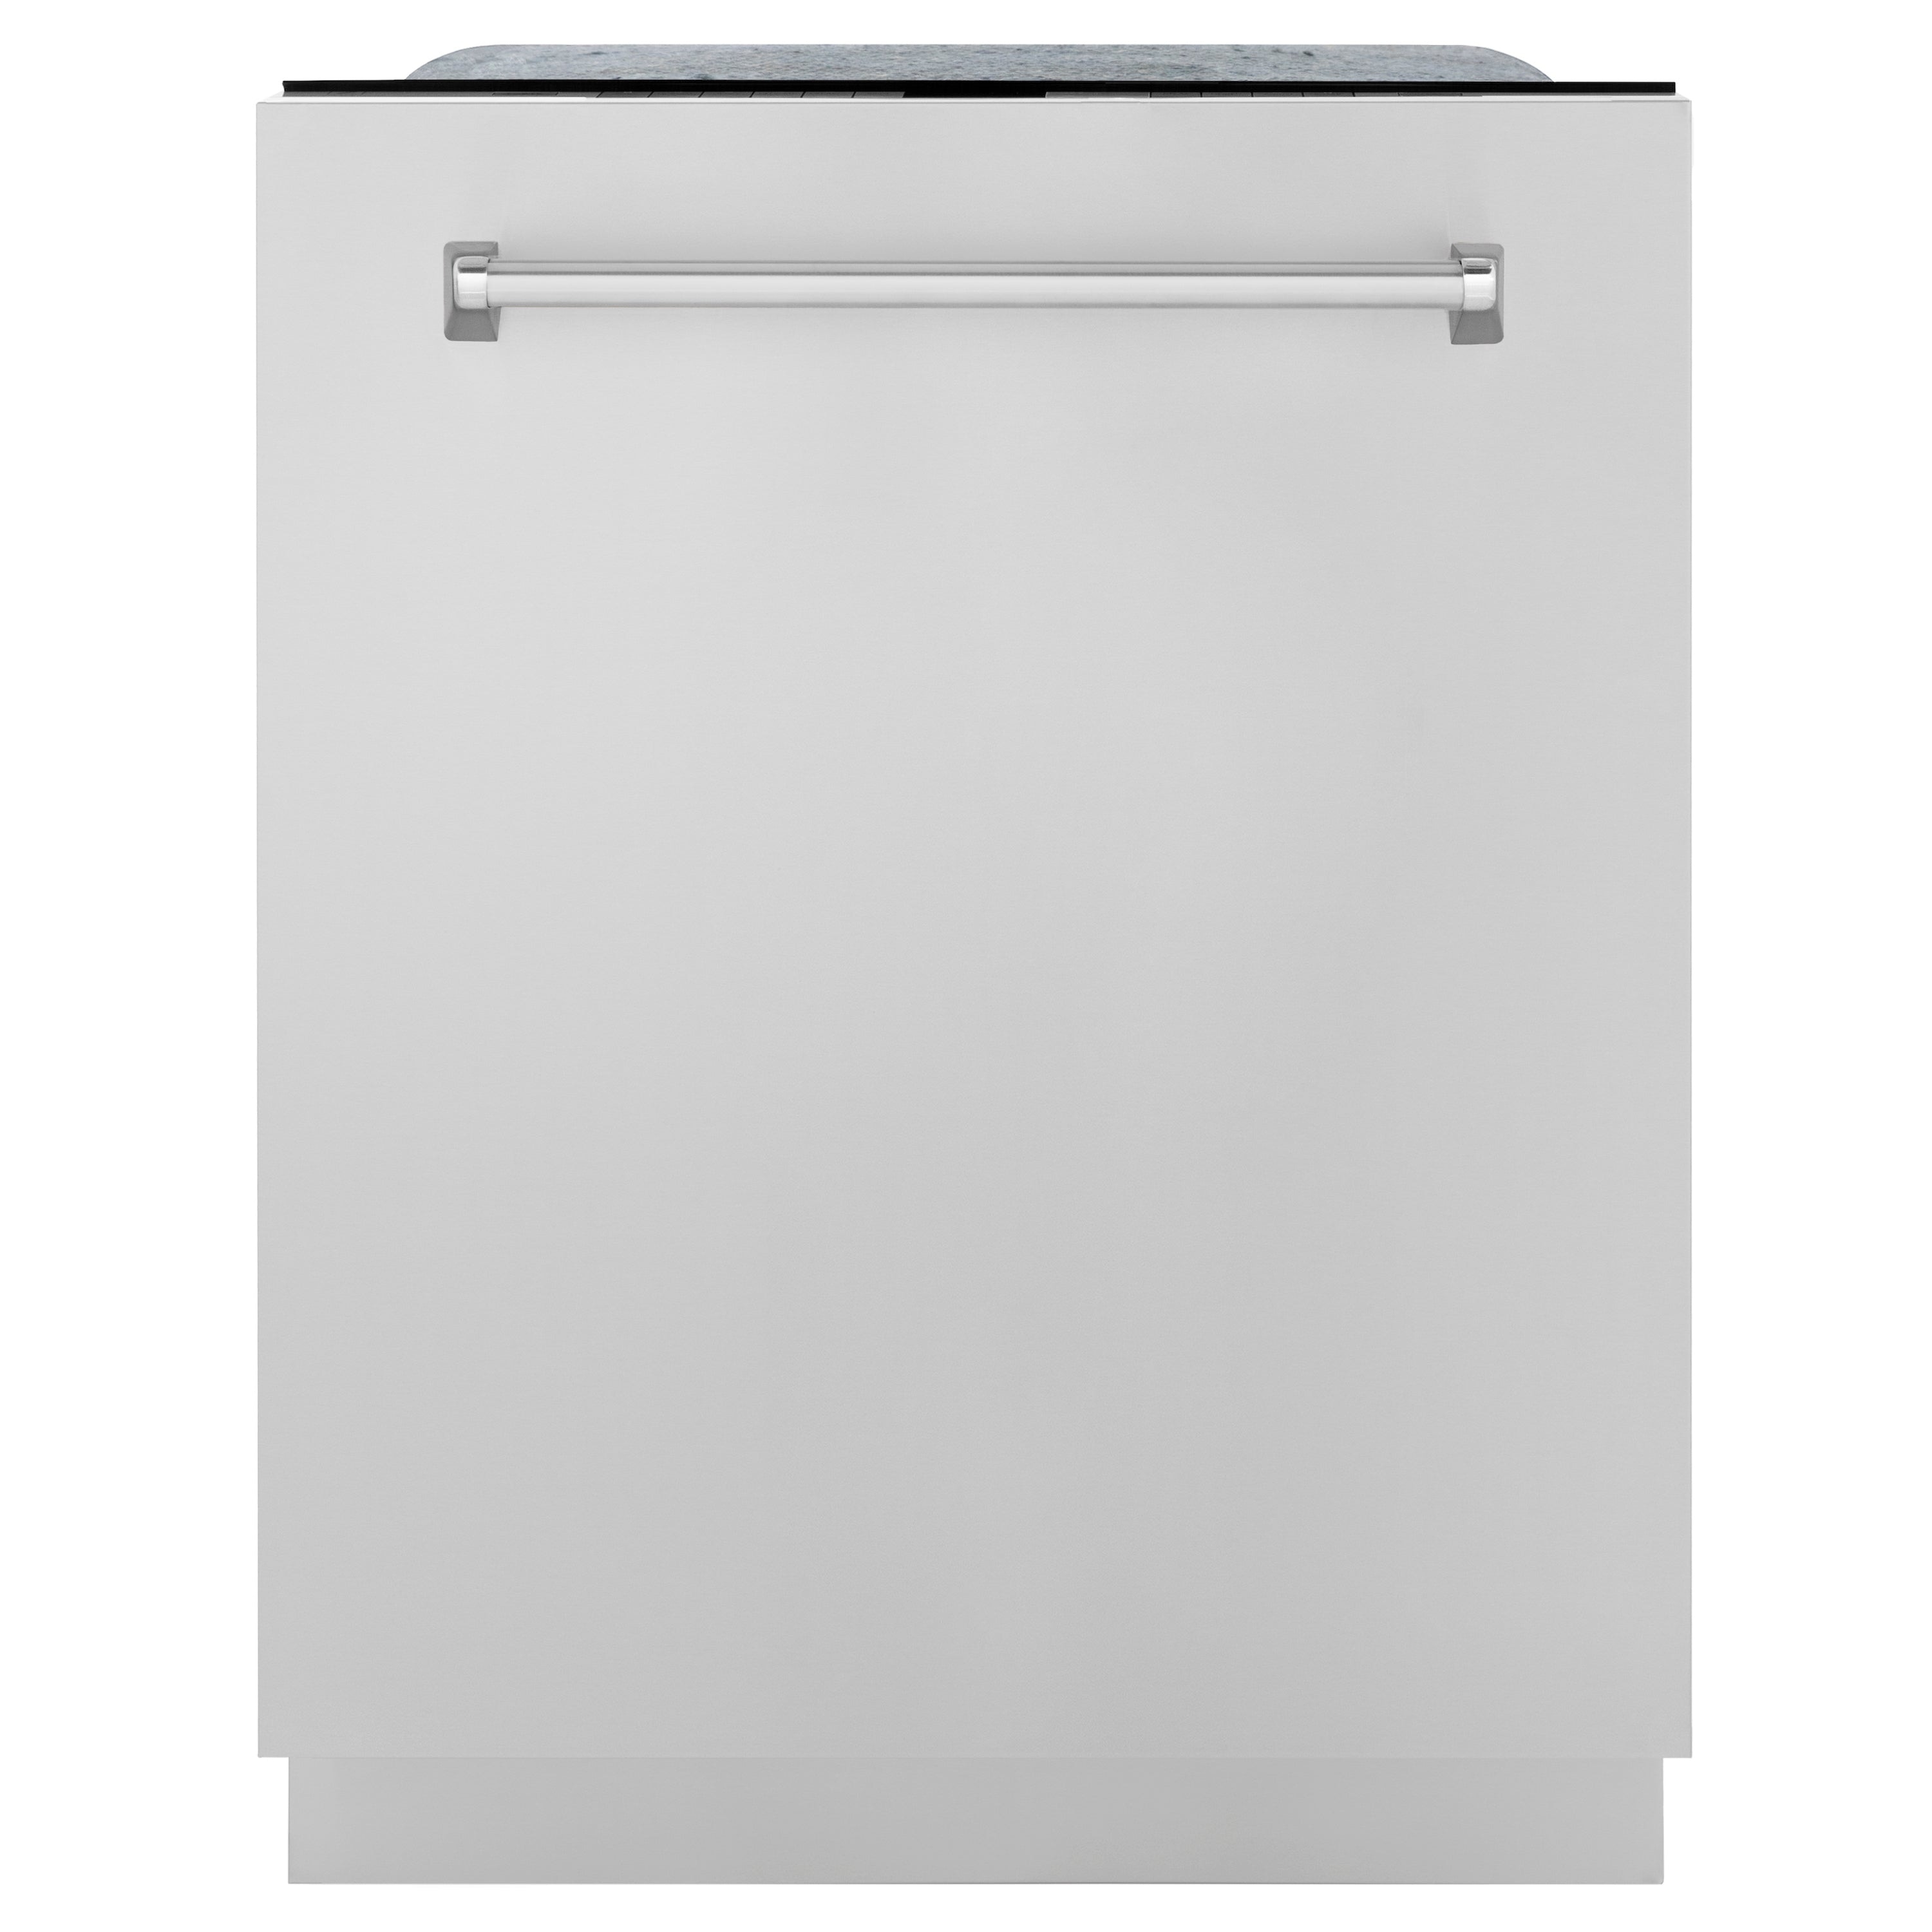 Zline Kitchen and Bath ZLINE 24" Monument Series 3rd Rack Top Touch Control Dishwasher in Custom Panel Ready with Stainless Steel Tub (DWMT) Option 2